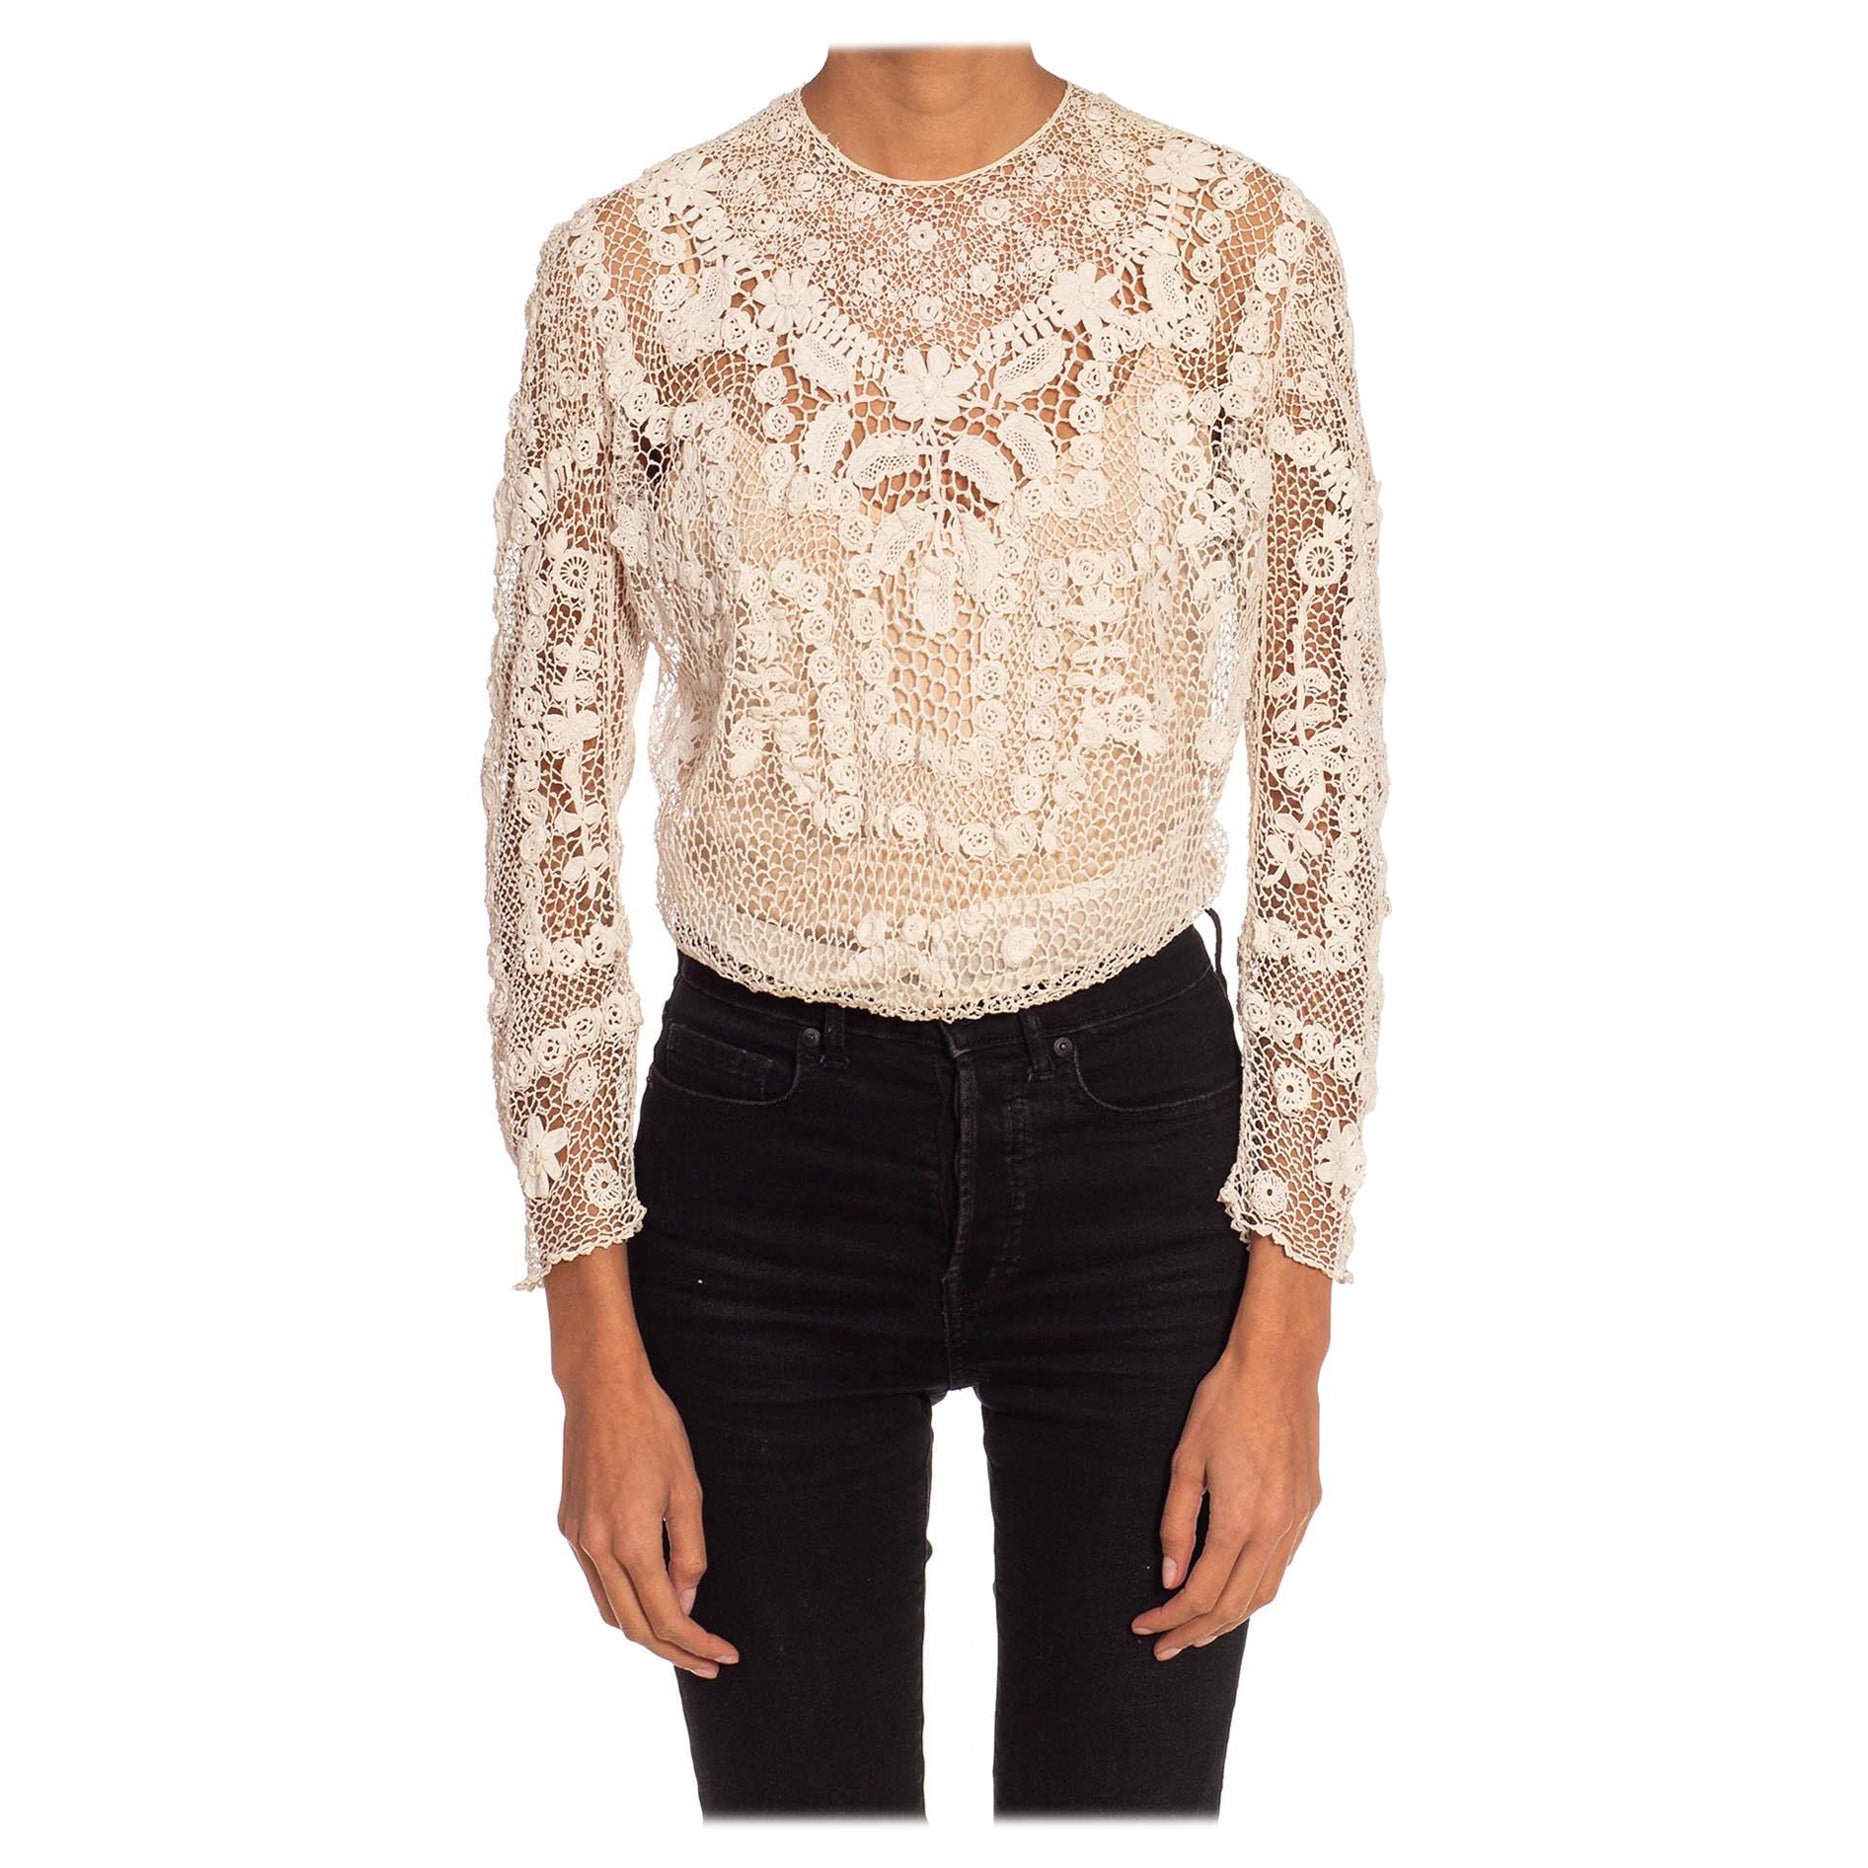 Victorian White Floral Top With Long Sleeves